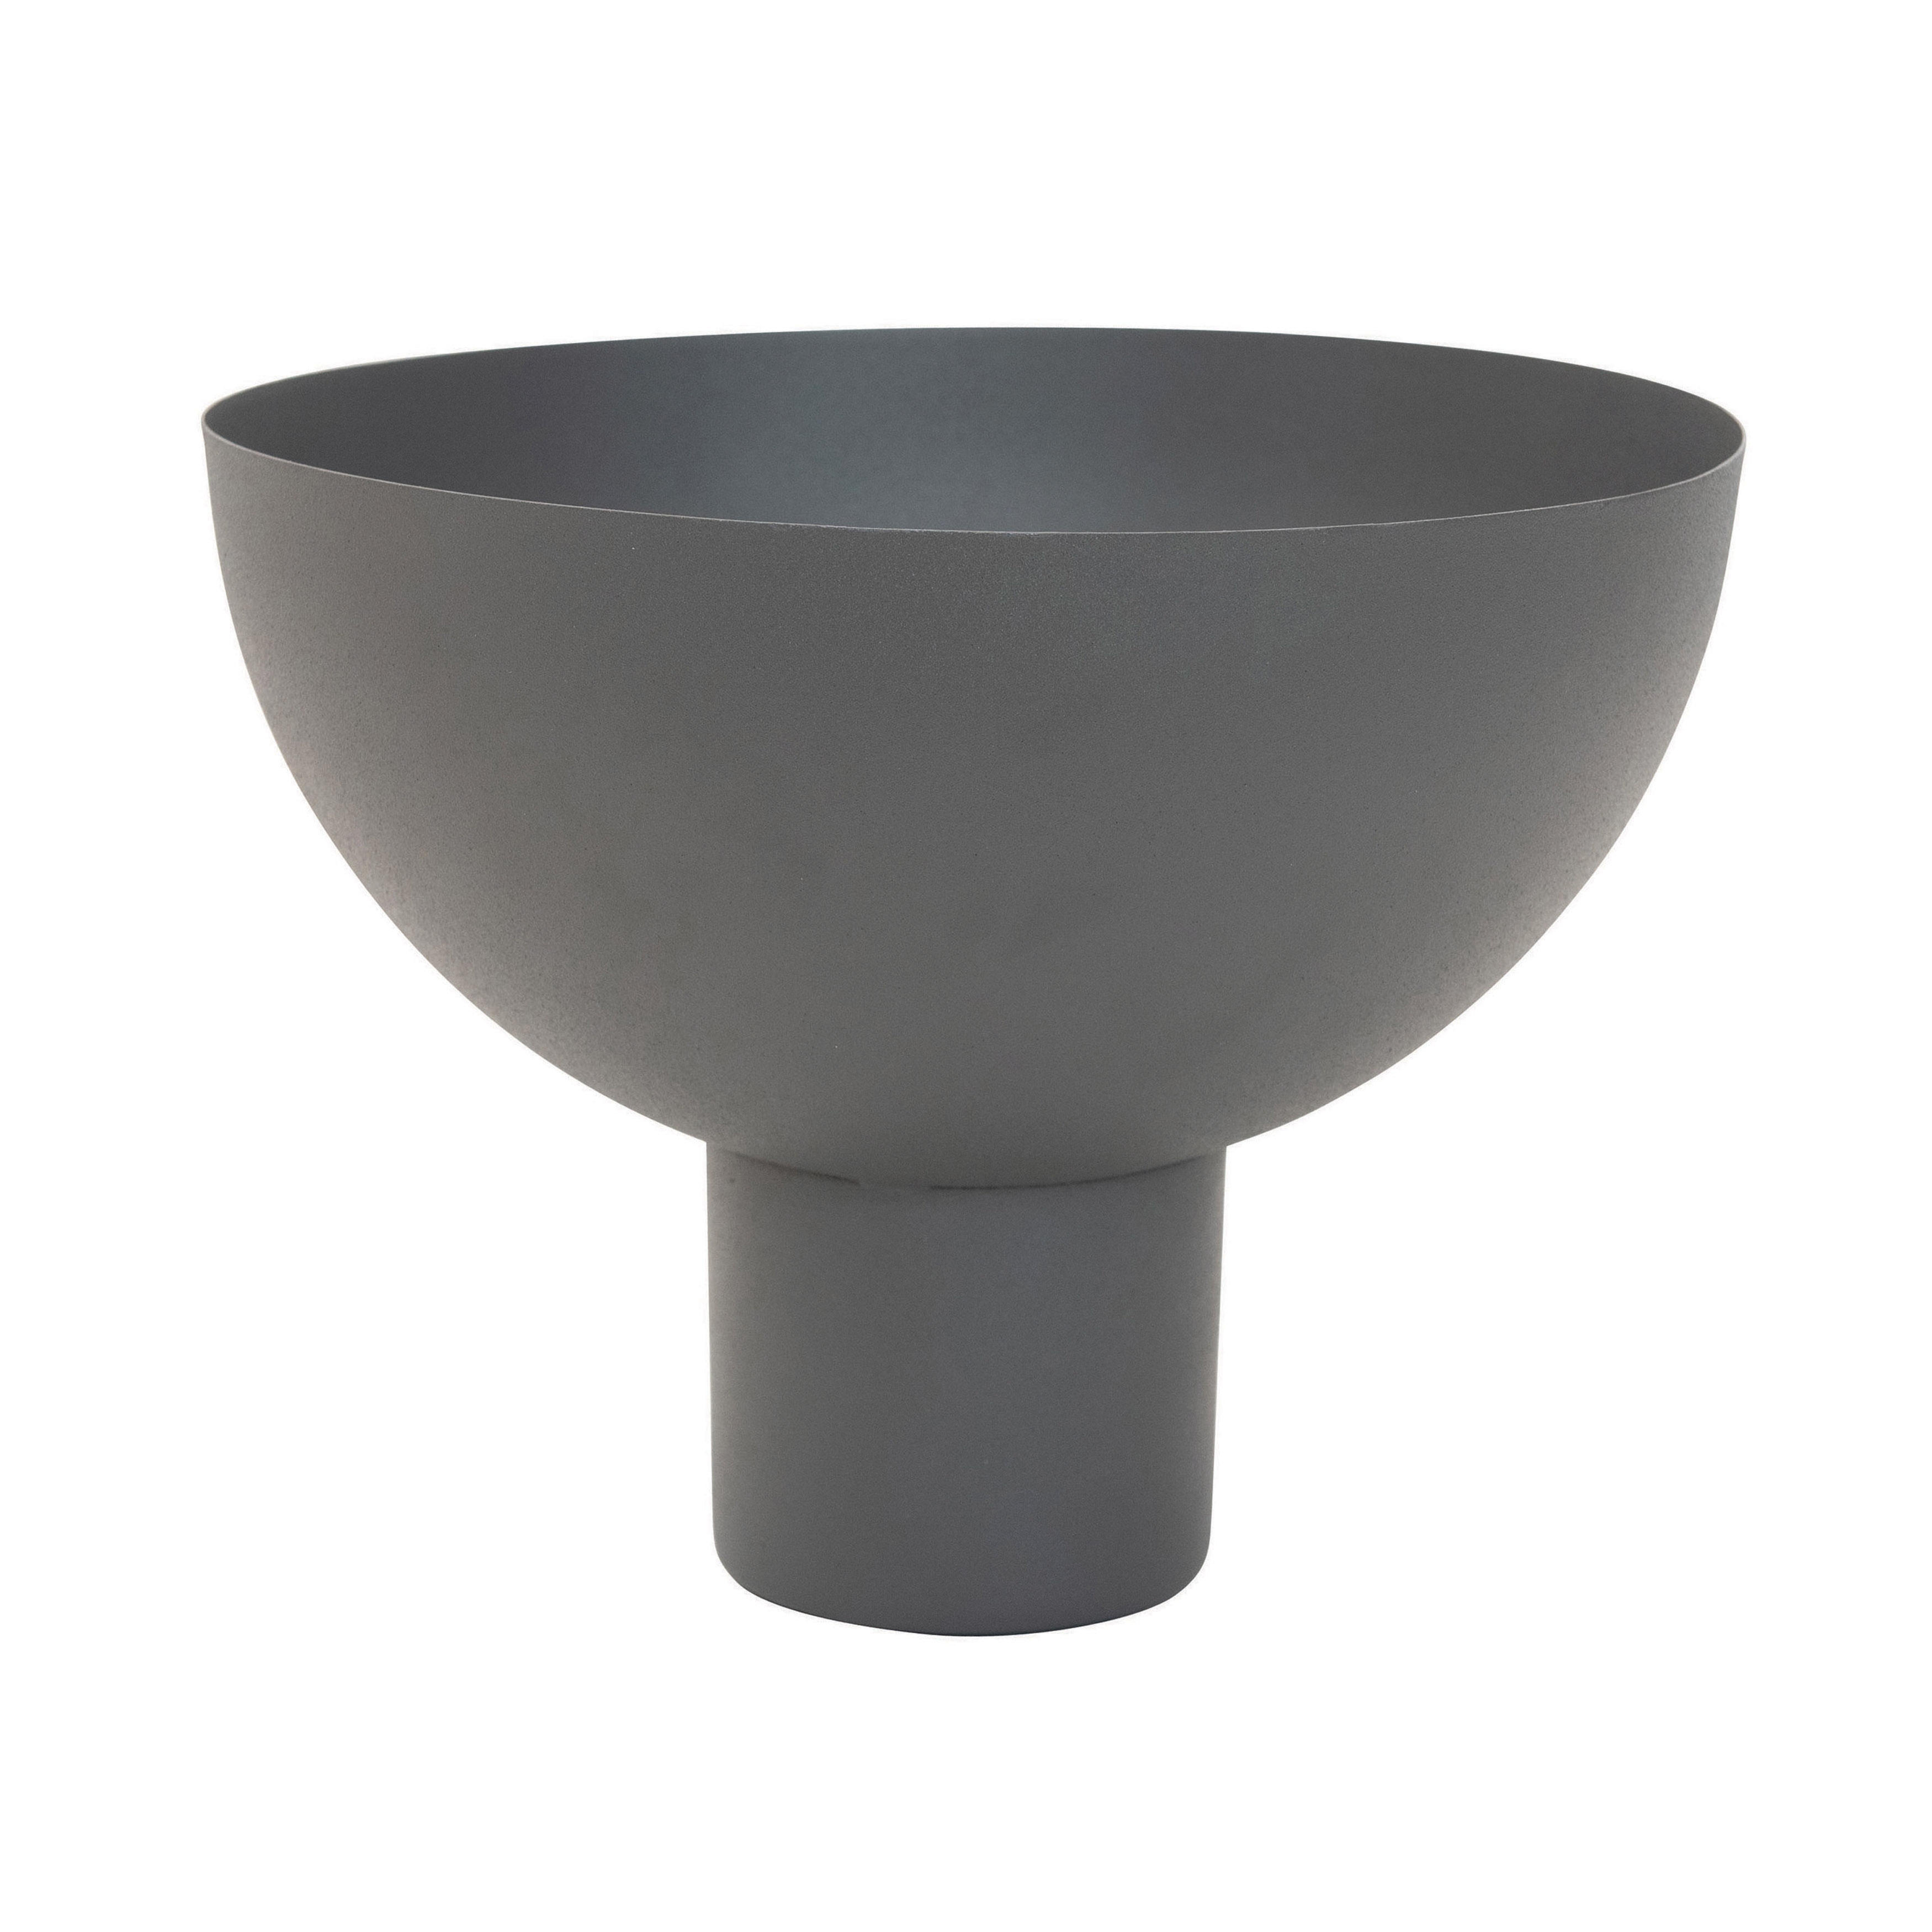 Beyond & Grey - - Decorative Bowl, 33786628 - On Bath Sale Bed Footed Metal